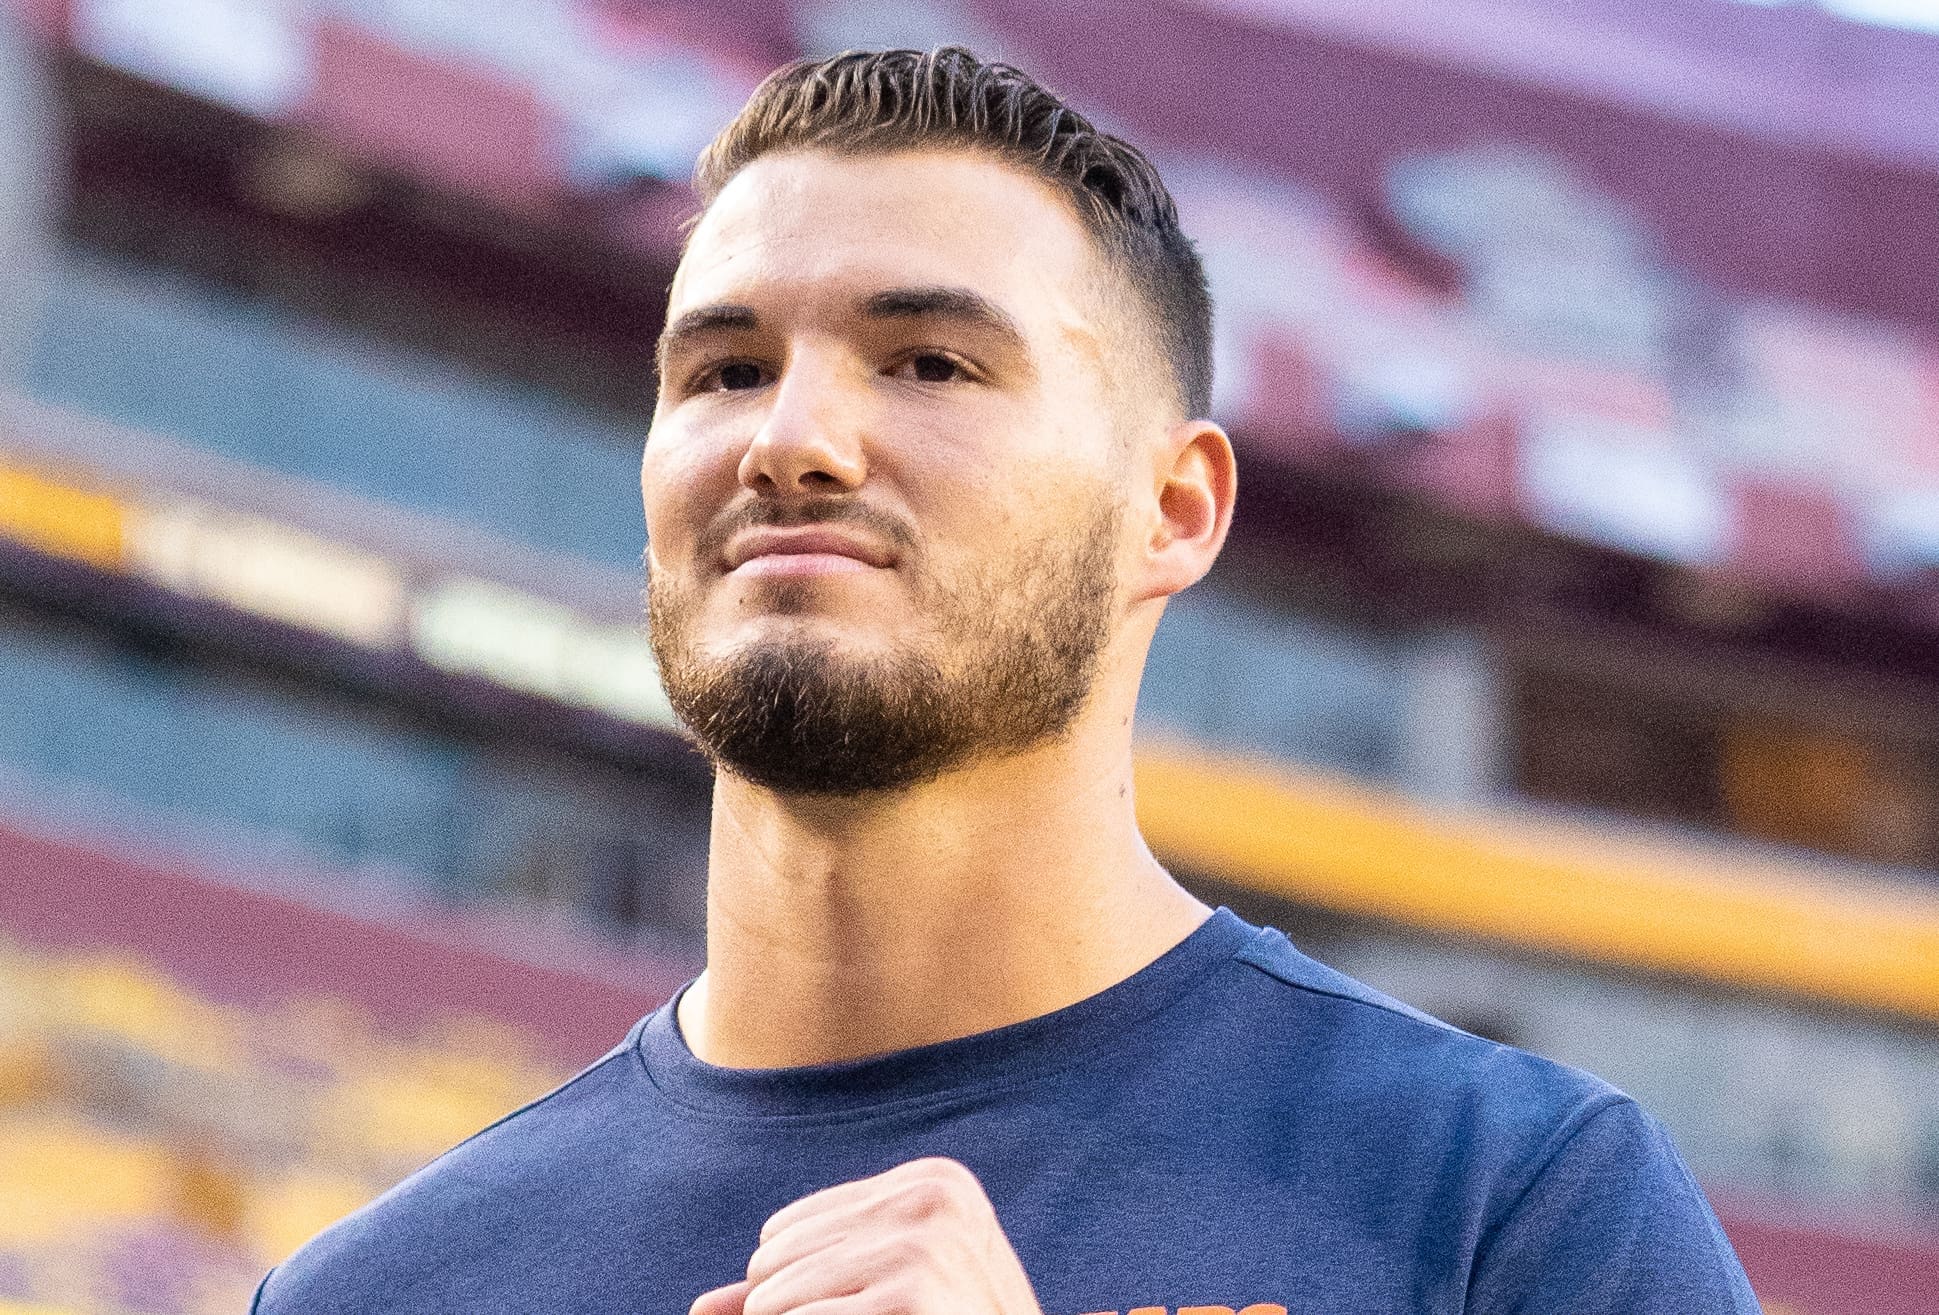 Mitchell Trubisky's contract details include $12.75 million in